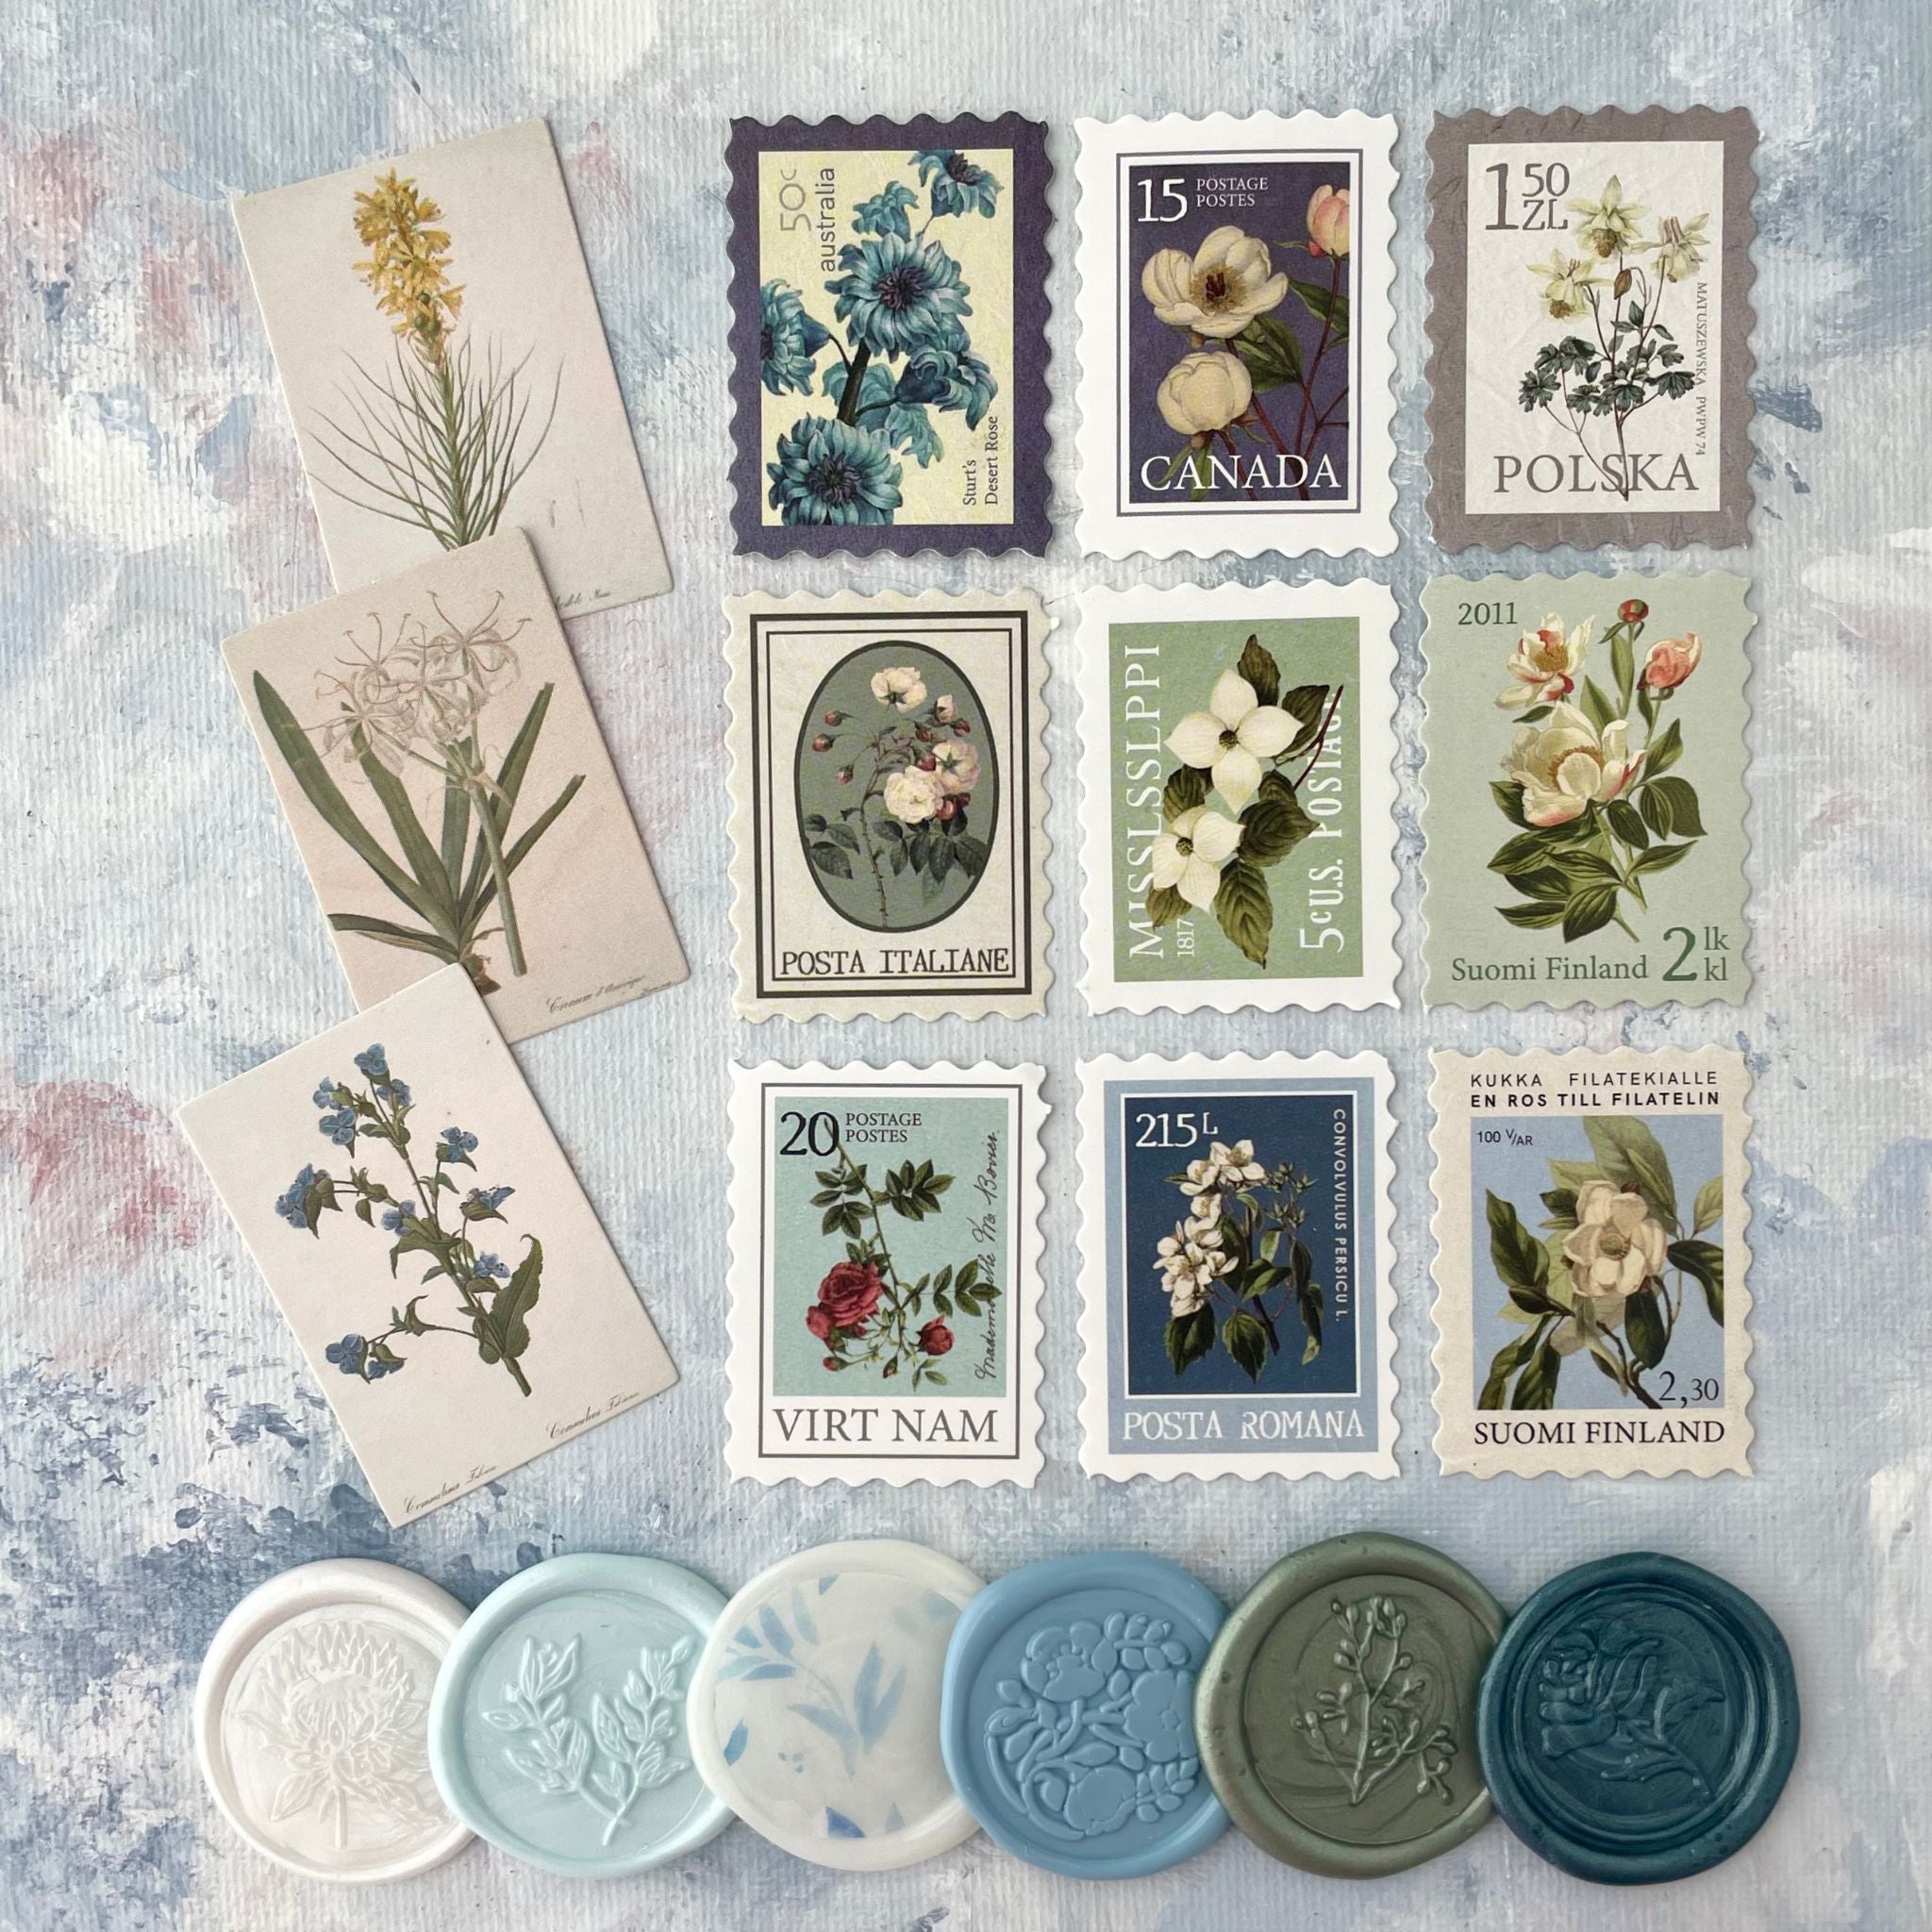 Wax Seal & fake Postage Flat Lay Kit in Shades of Blue